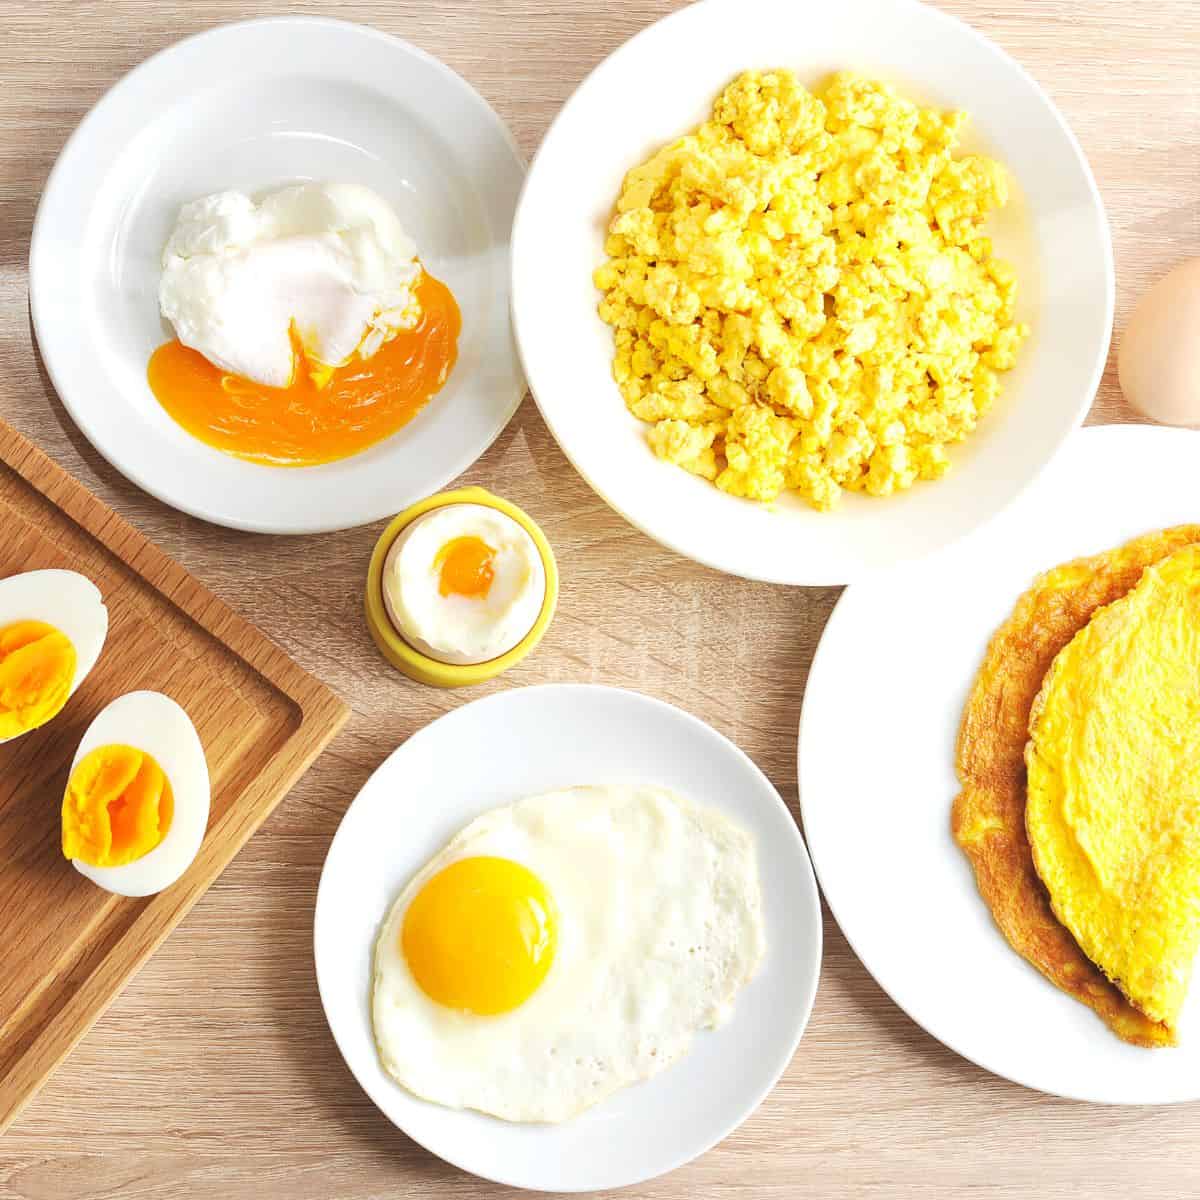 Egg-citing Keto Diet 5 Benefits of Adding Eggs to the Mix